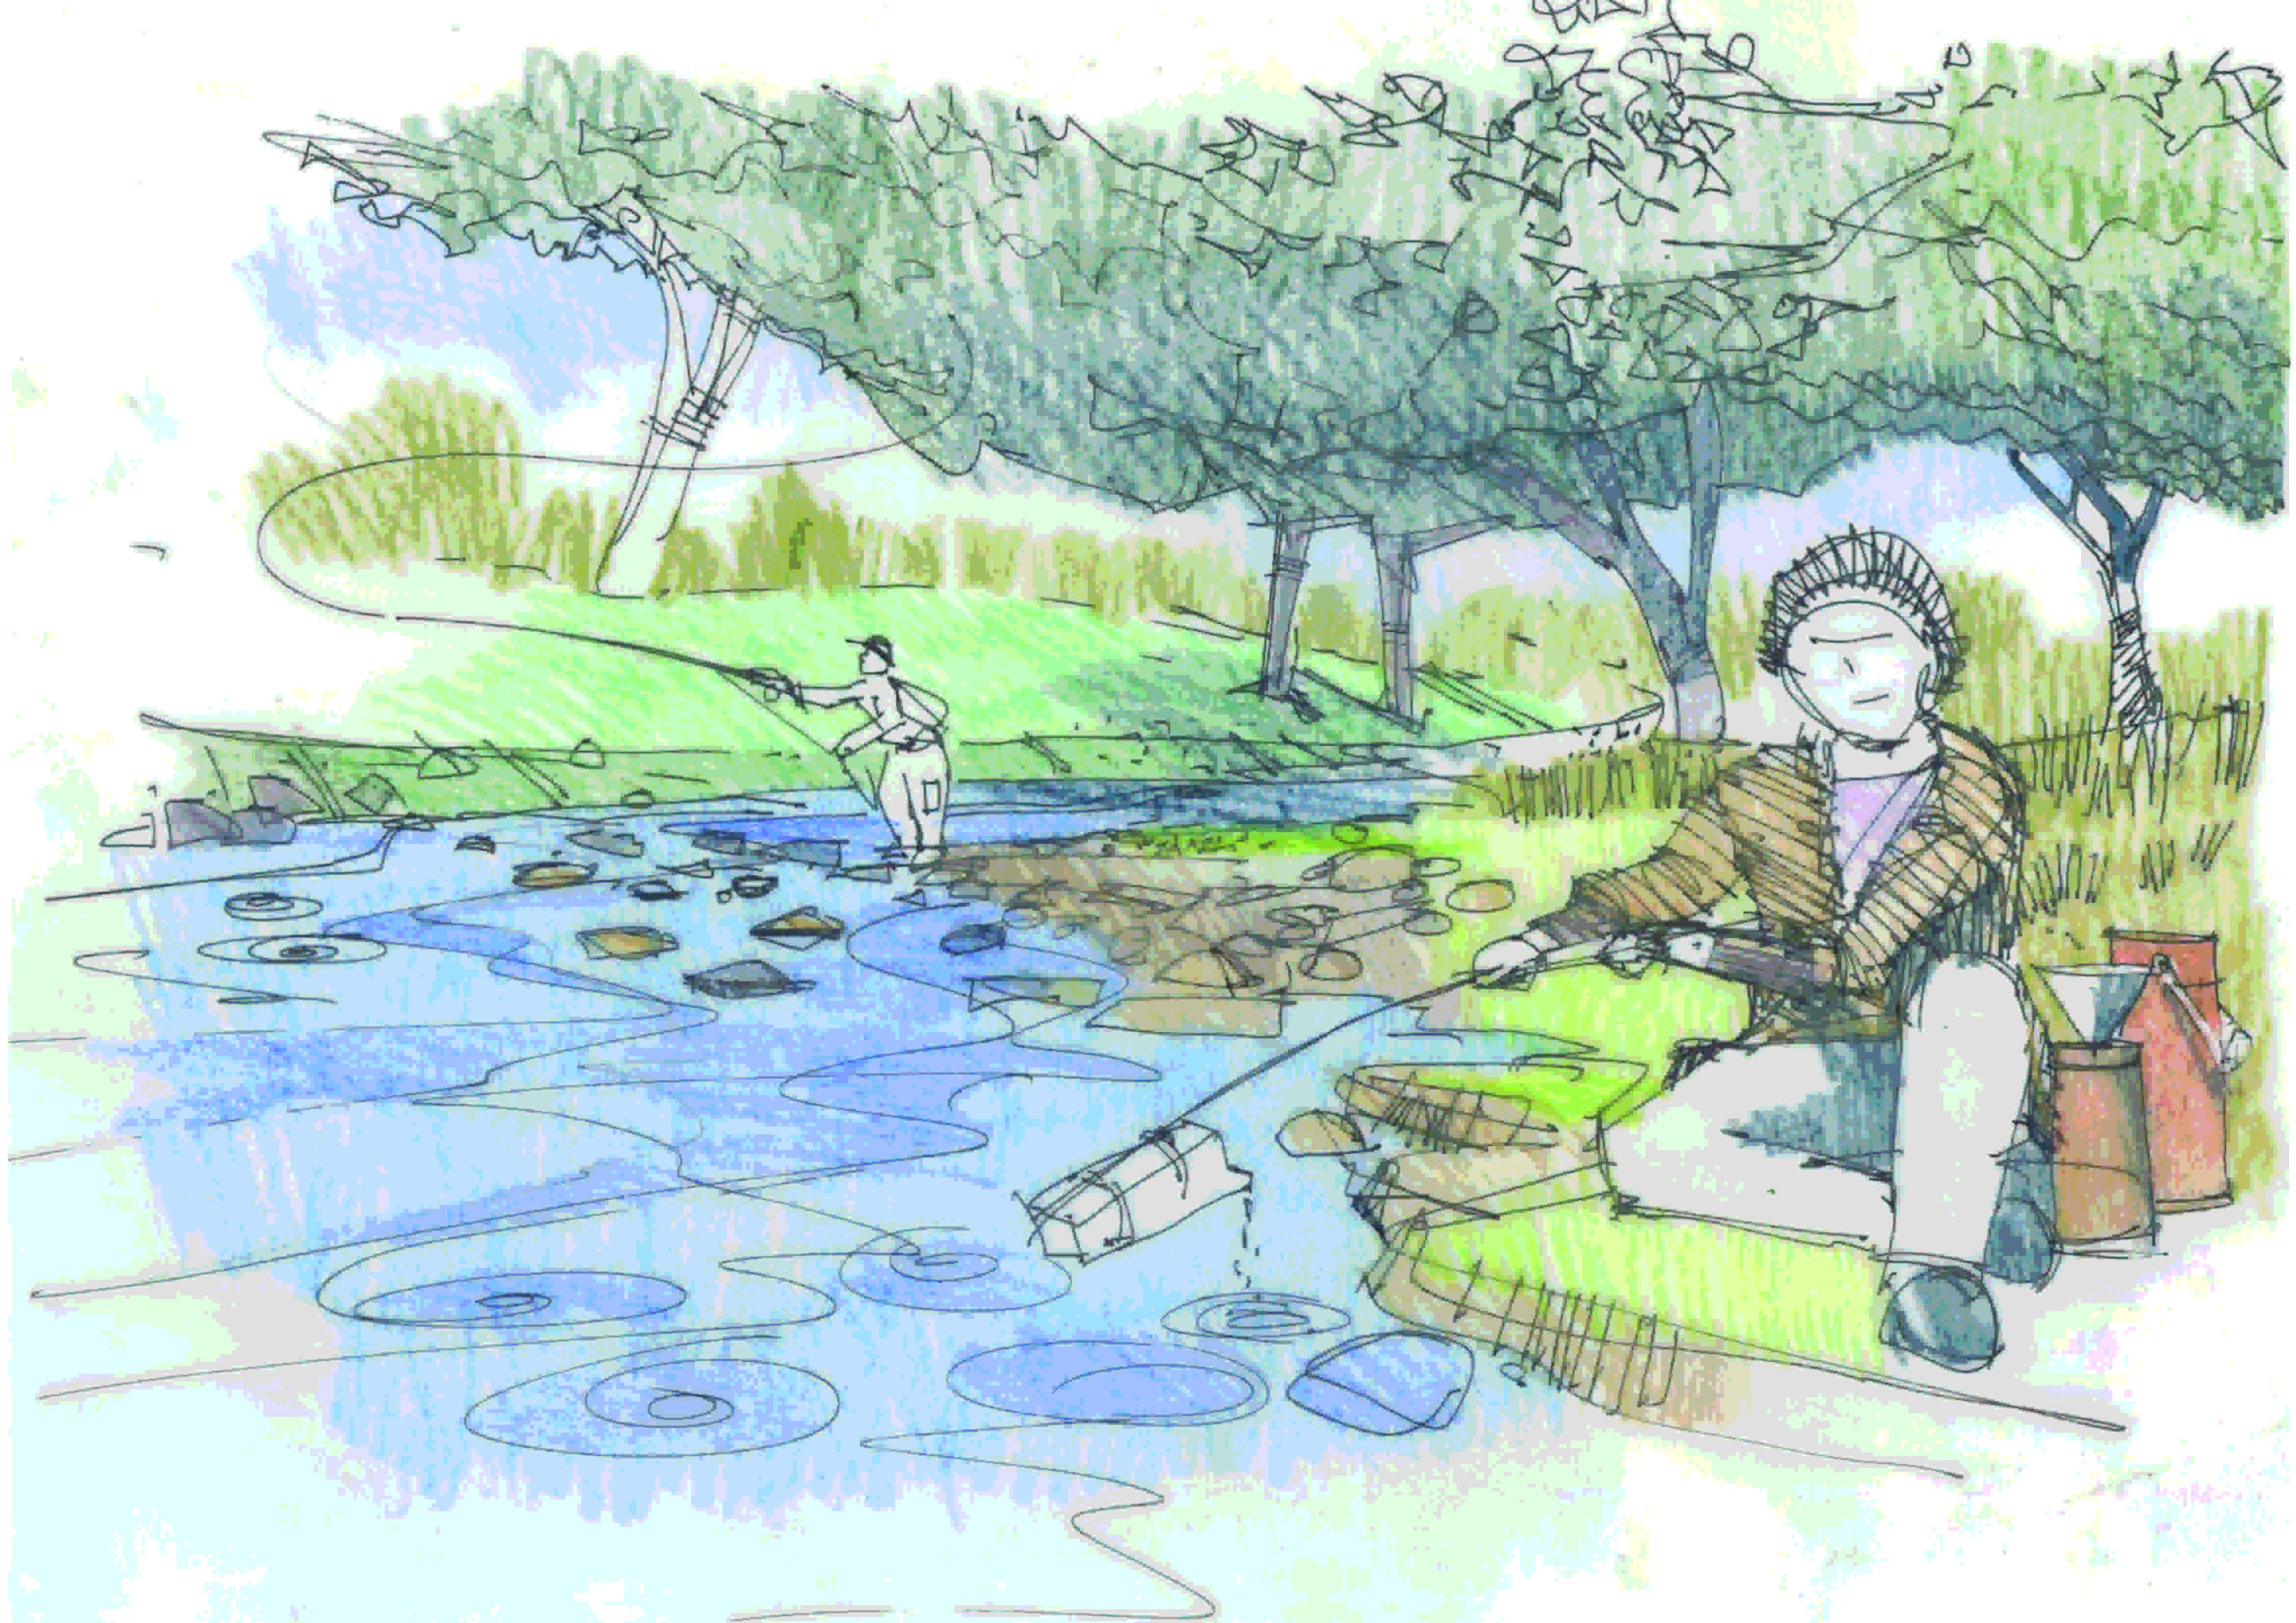 Illustration by Richard Carman showing fisherman next to river with crystal clear waters